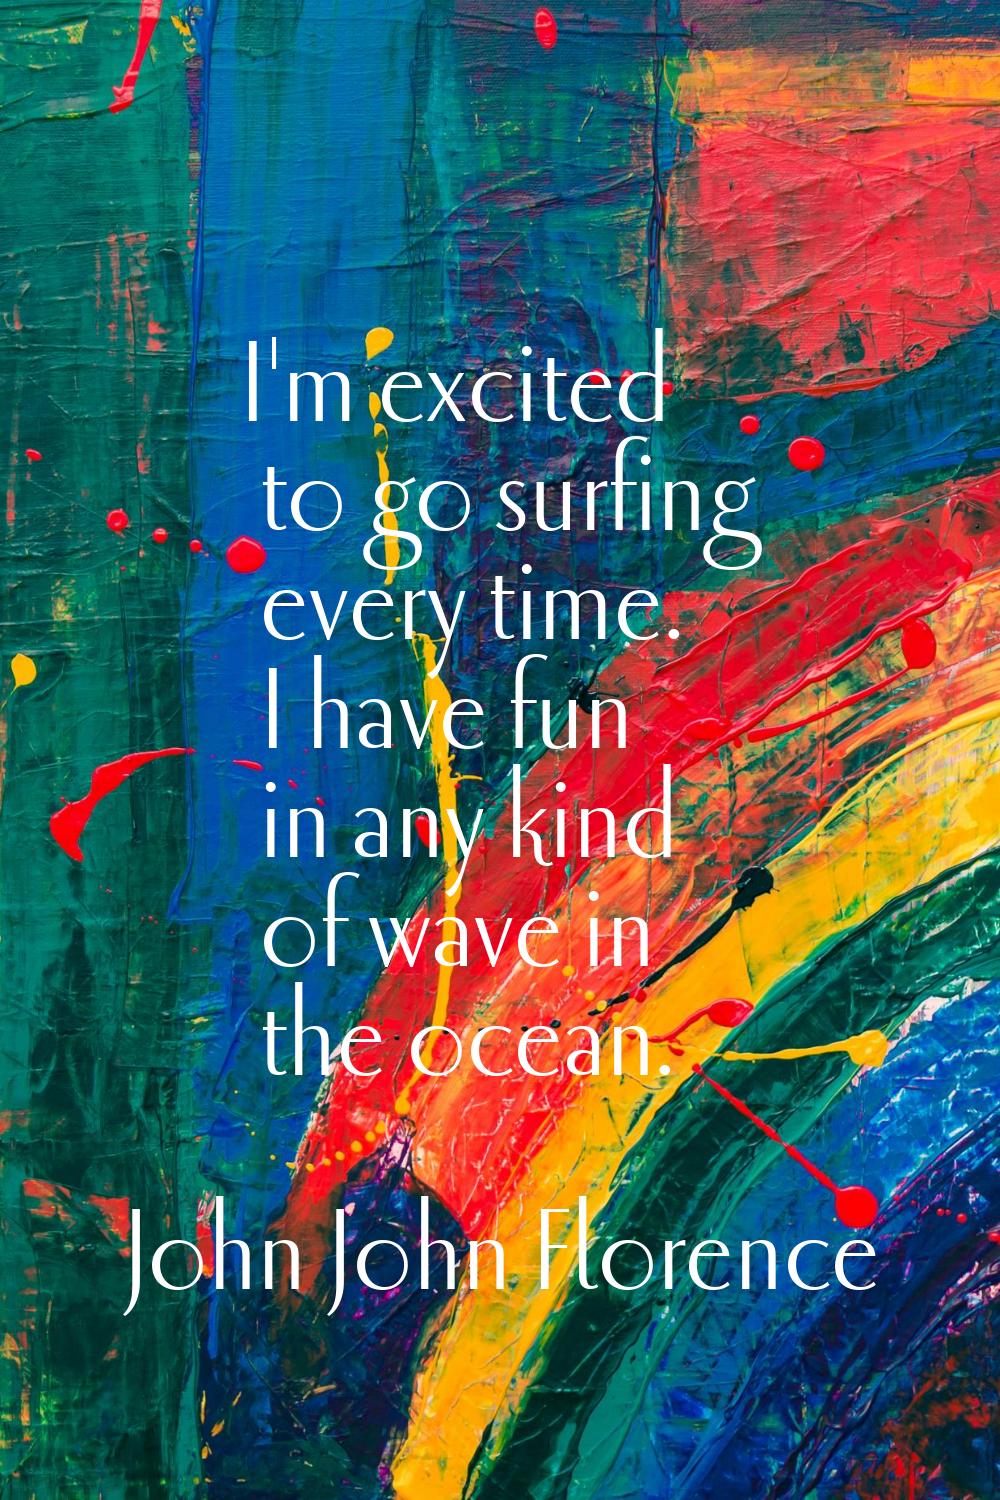 I'm excited to go surfing every time. I have fun in any kind of wave in the ocean.